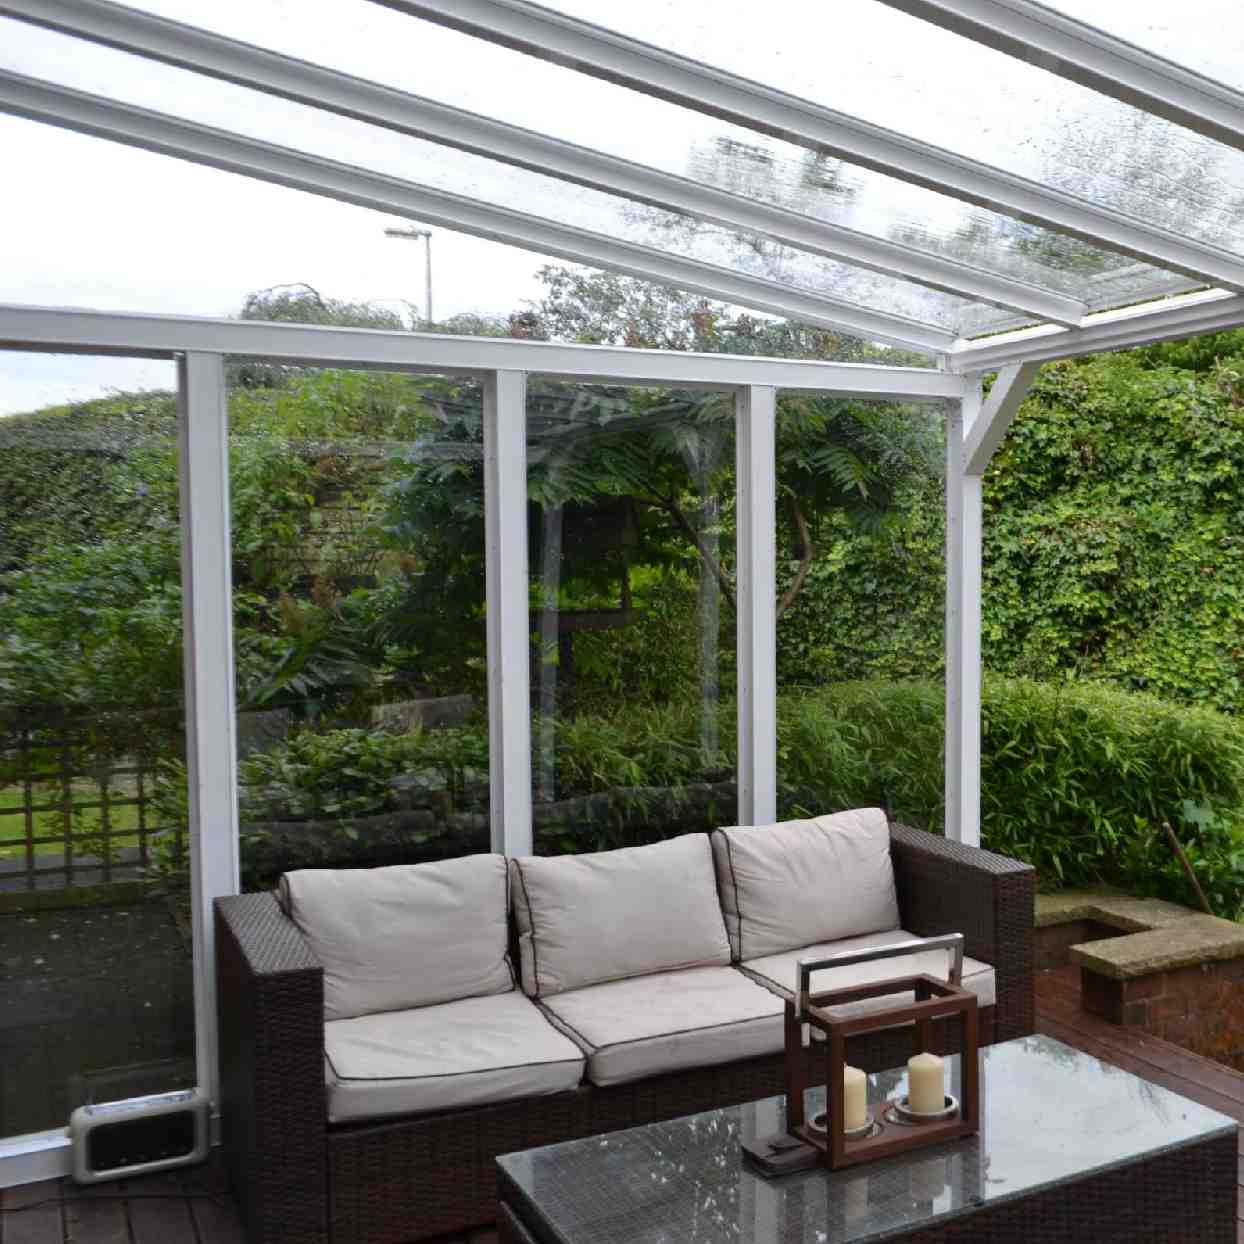 Buy Omega Verandah White with 16mm Polycarbonate Glazing - 8.4m (W) x 4.0m (P), (4) Supporting Posts online today